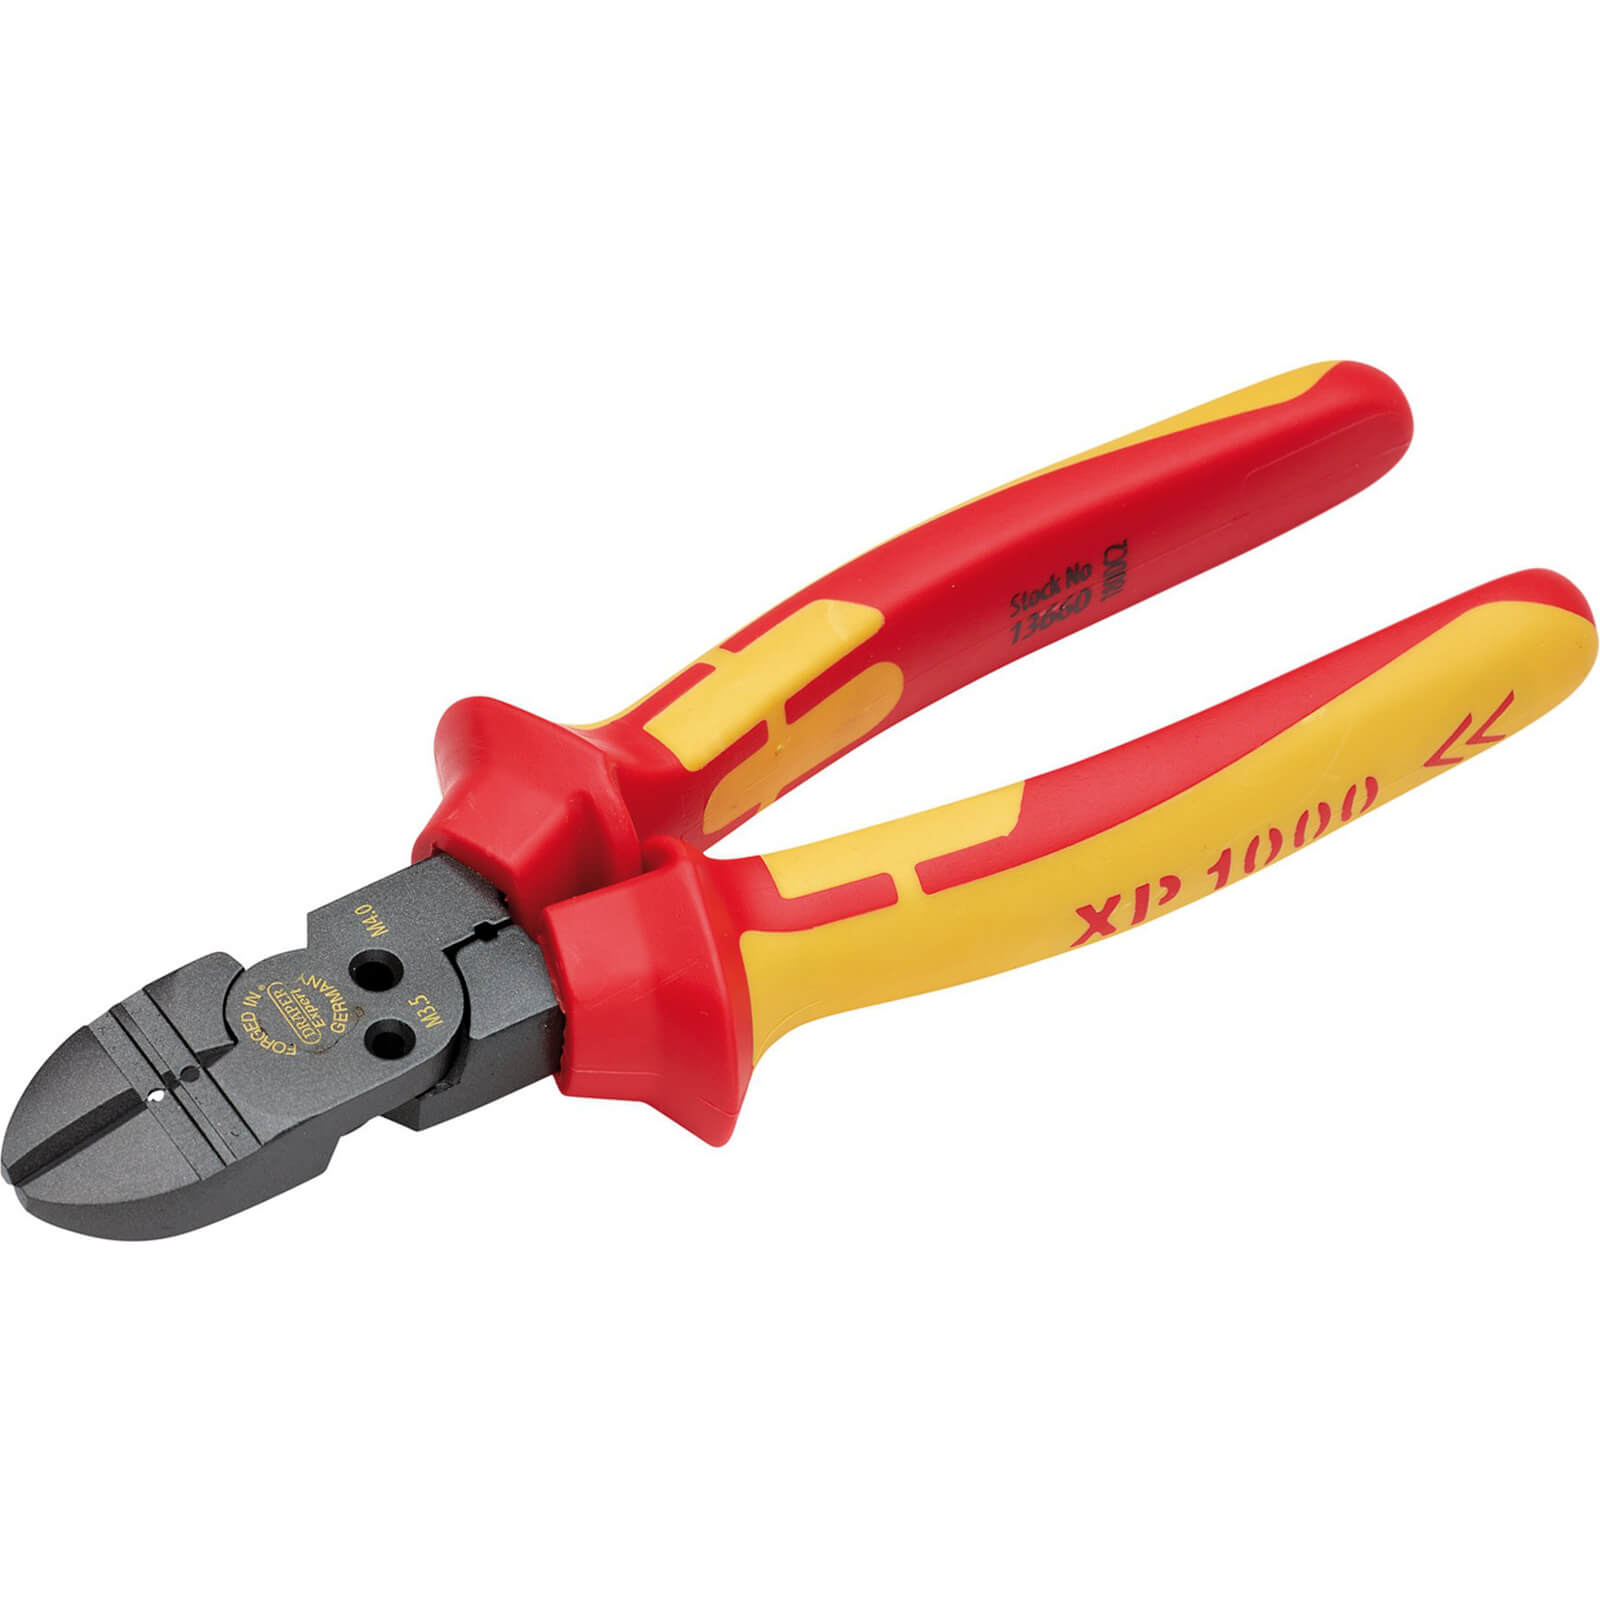 Image of Draper XP1000 VDE Insulated 4 in 1 Combination Cutter 180mm